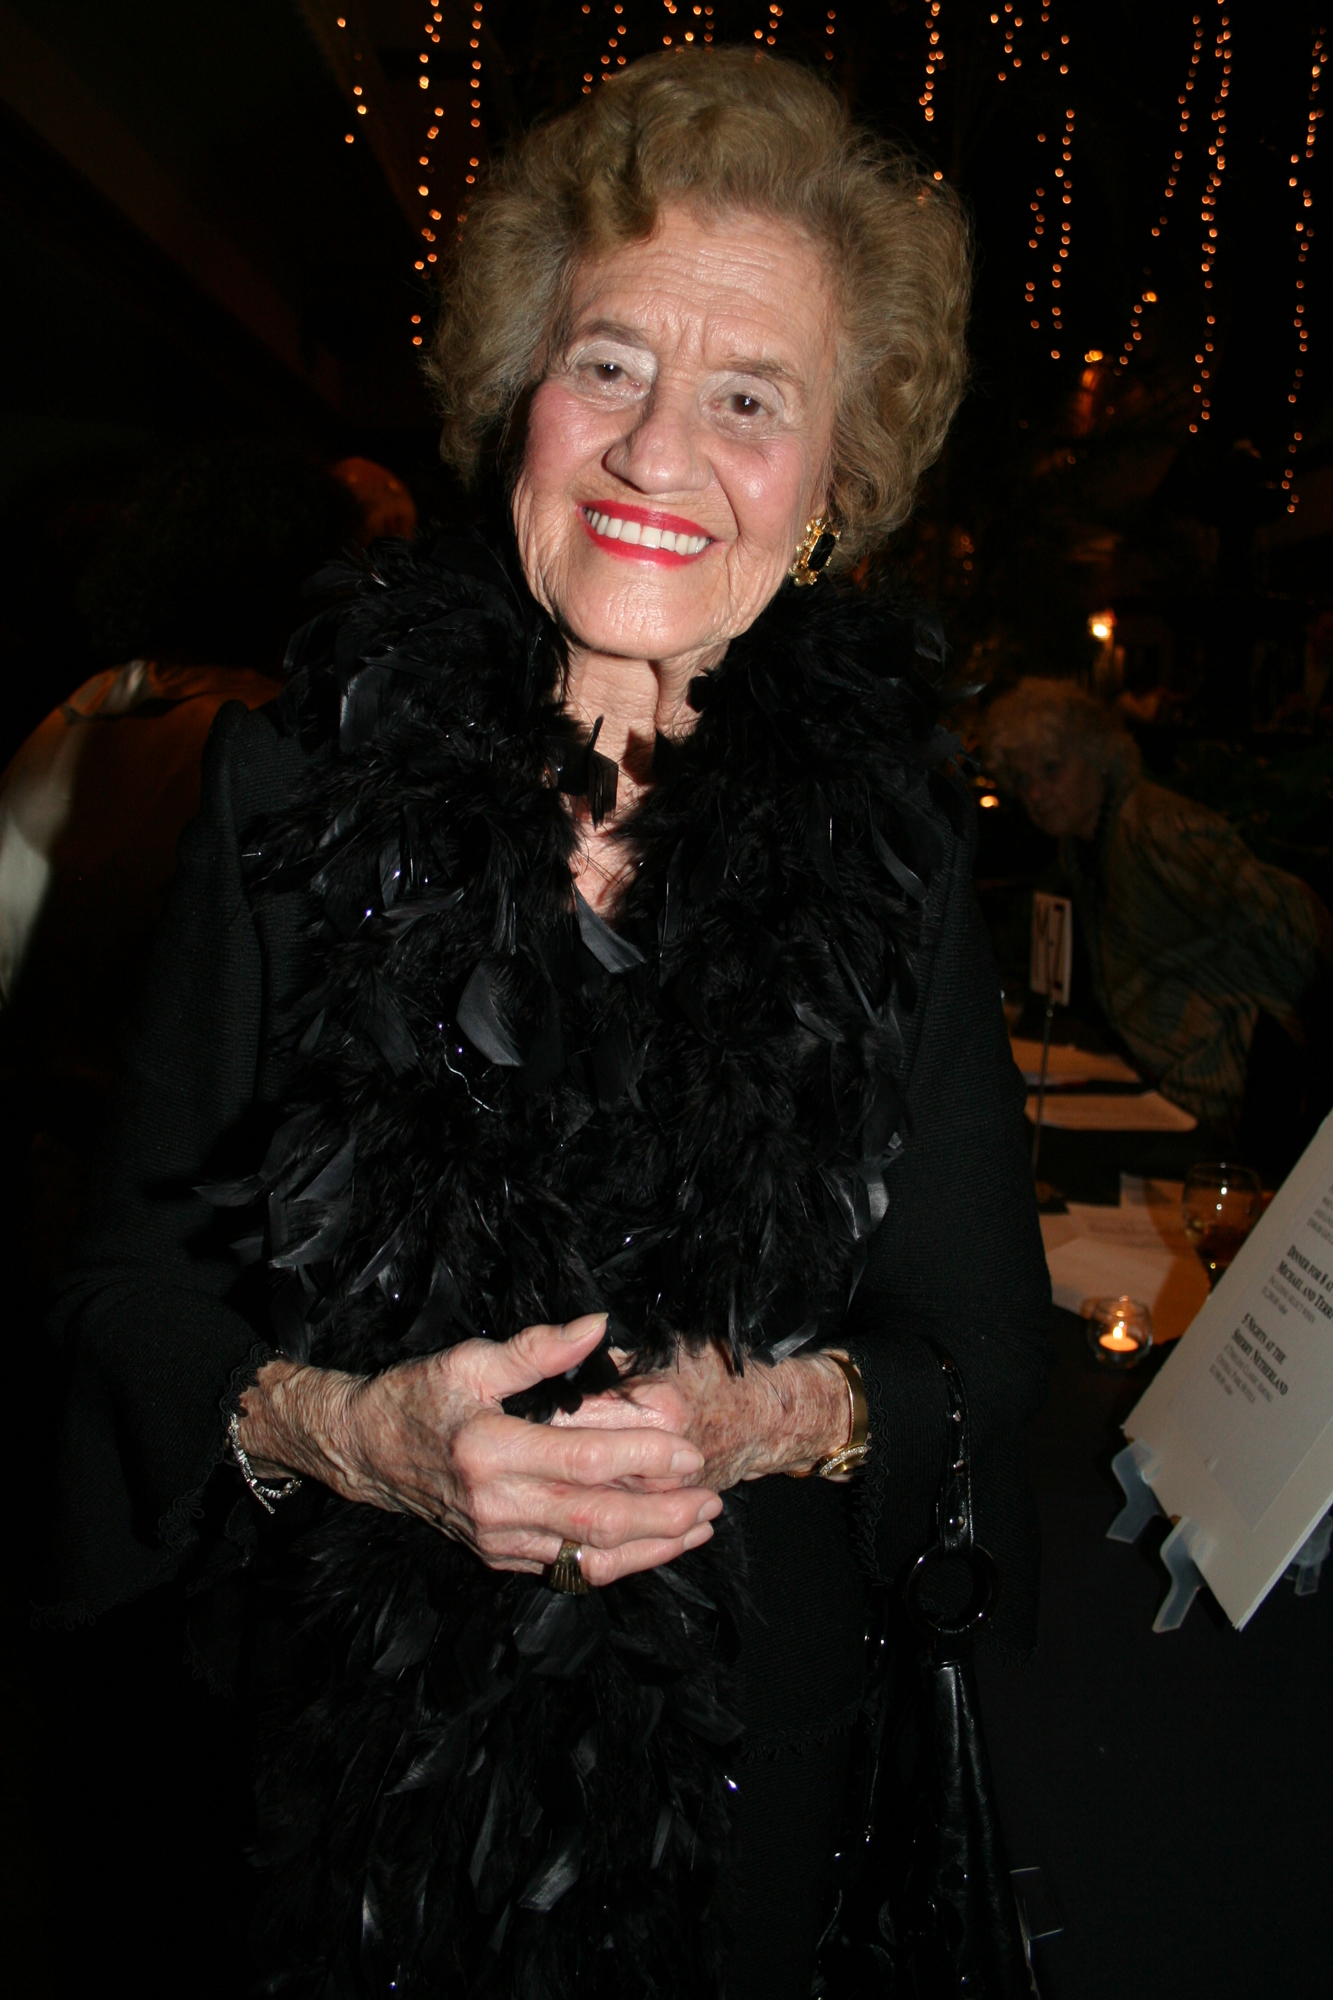 Betty Schoenbaum was a regular at black tie fundraiser events. Here, she is pictured Jan. 17, 2010, at Generations honoring Ron and Janis Collier.